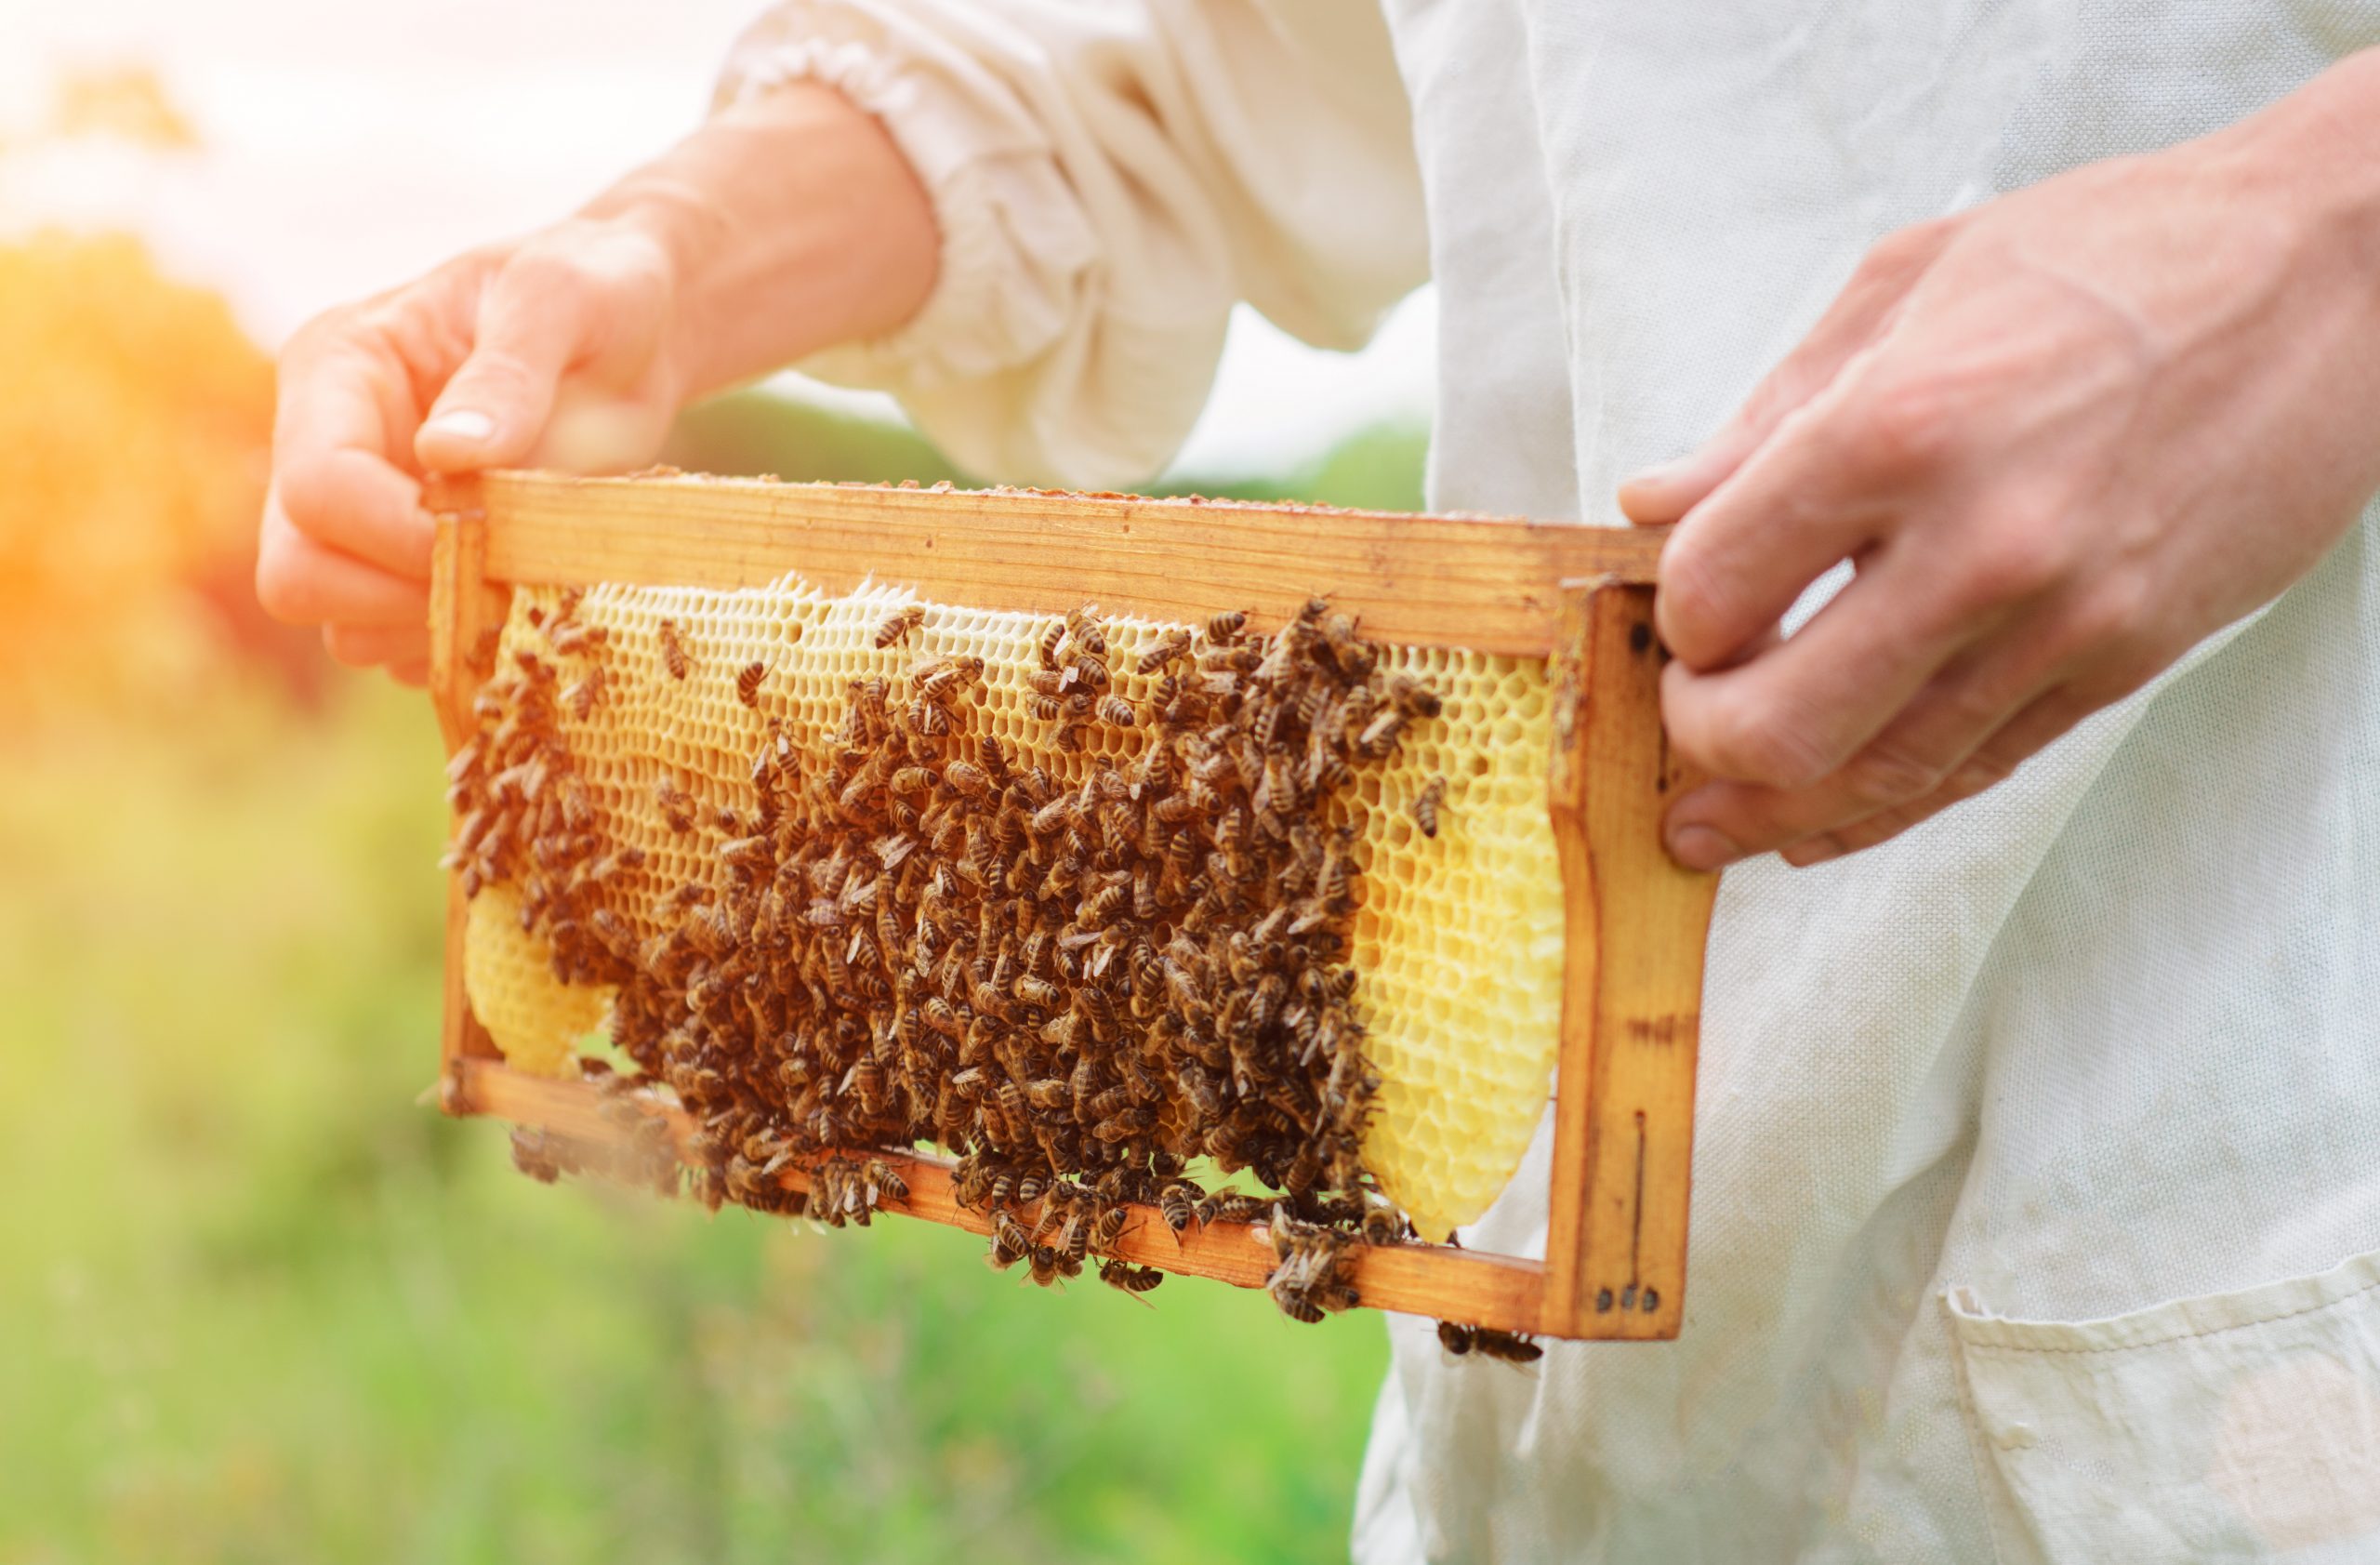 Bee-keeper holds a honeycomb covered in bees.